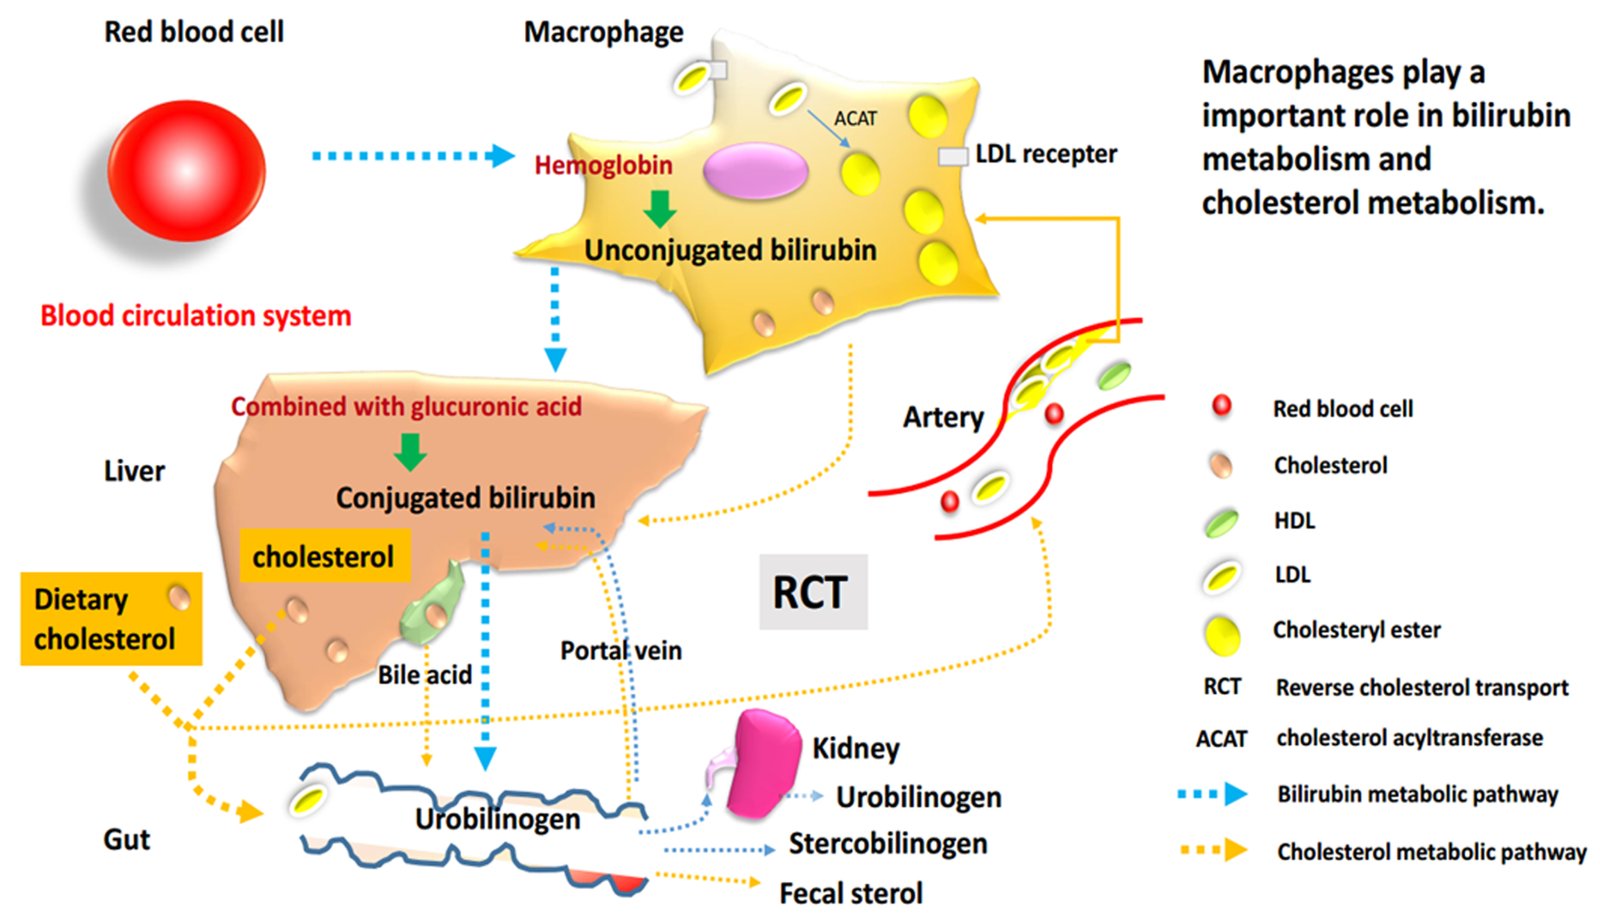 Macrophages essential cells for bilirubin metabolism and reverse transport of cholesterol with relevance for cardiovascular disease